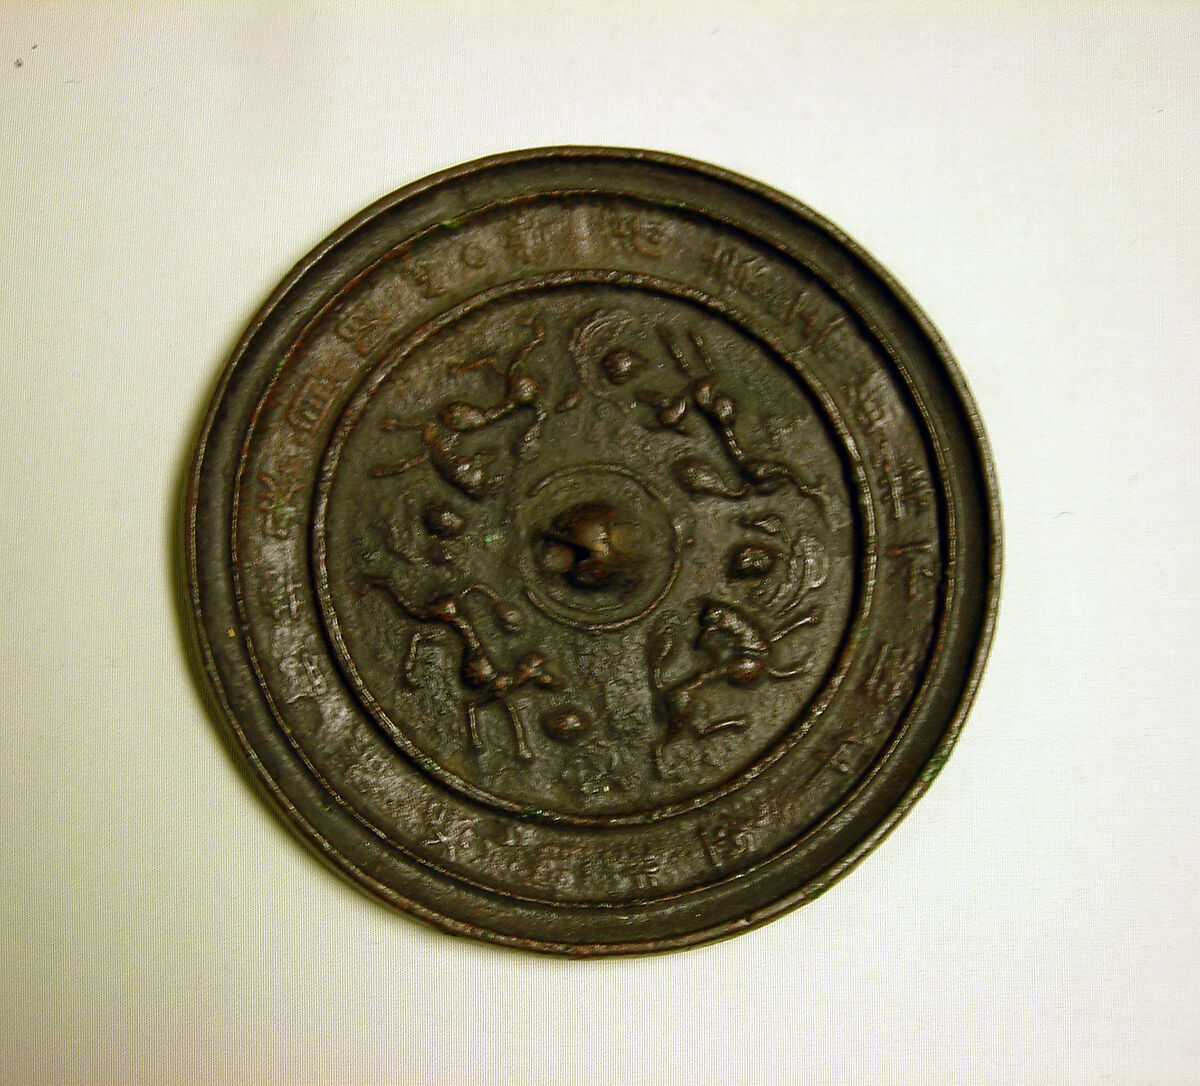 Mirror in Han style, Bronze, China 